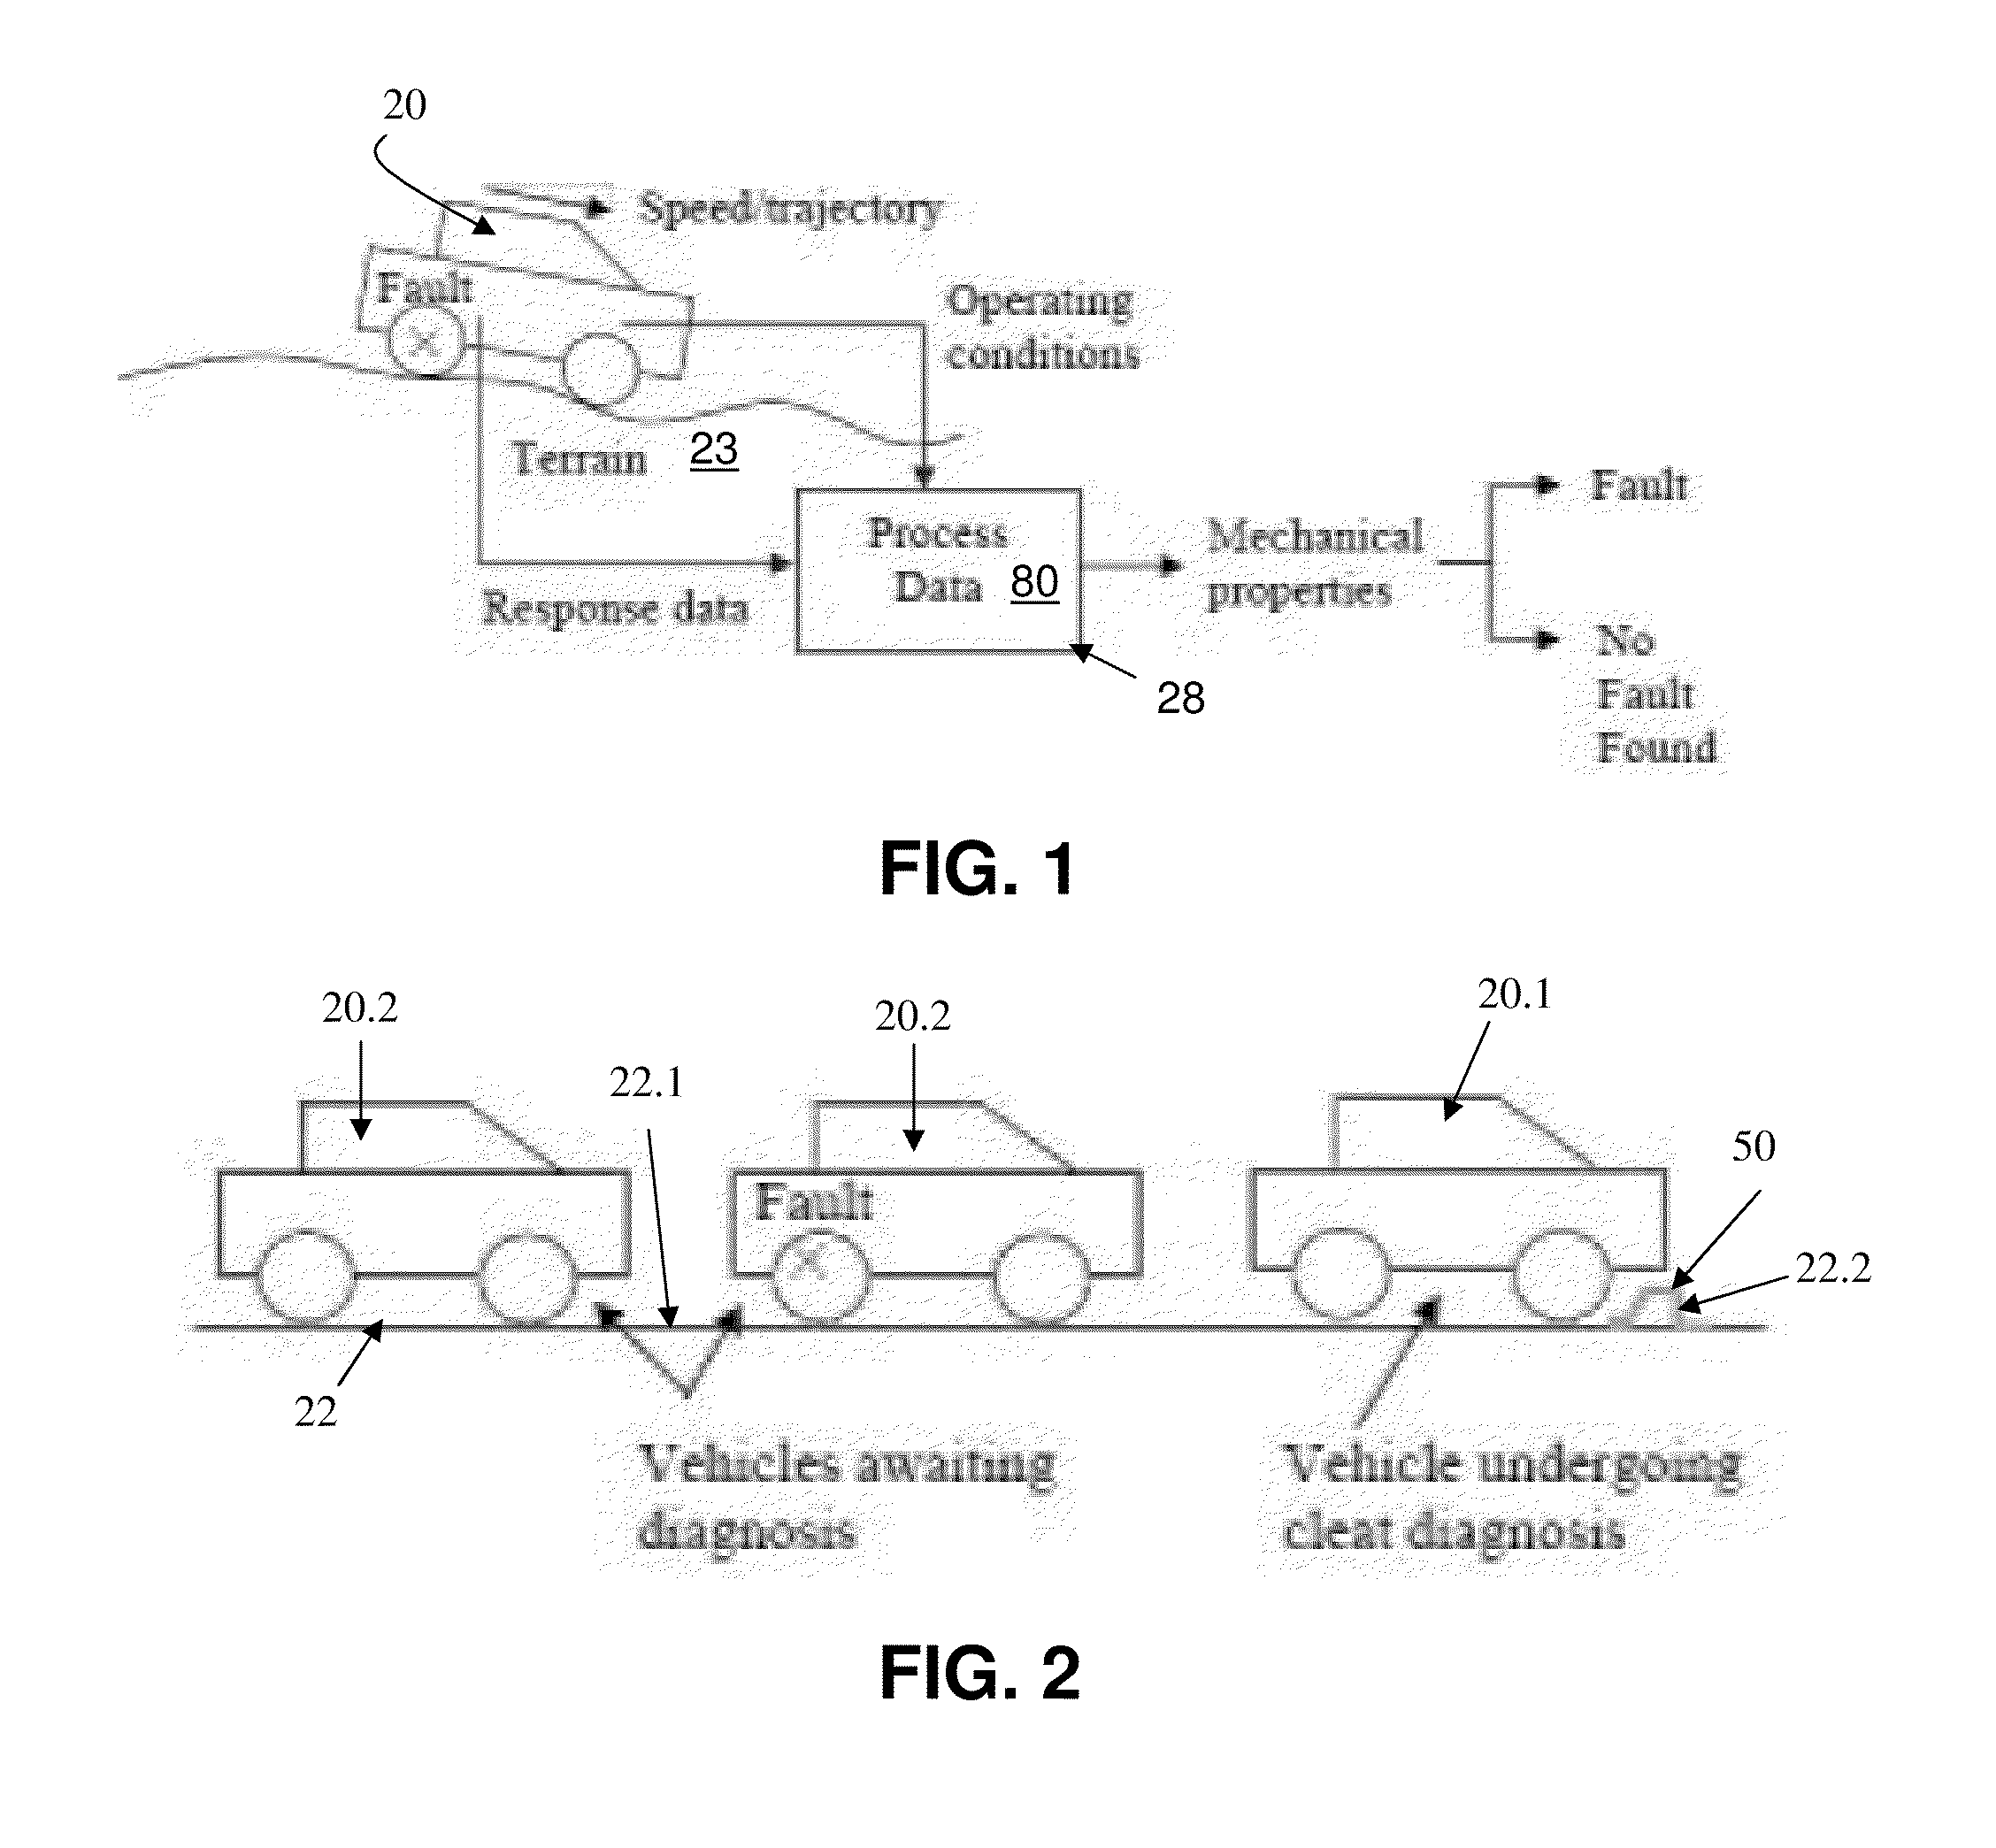 Methods and apparatus for diagnosing faults of a vehicle